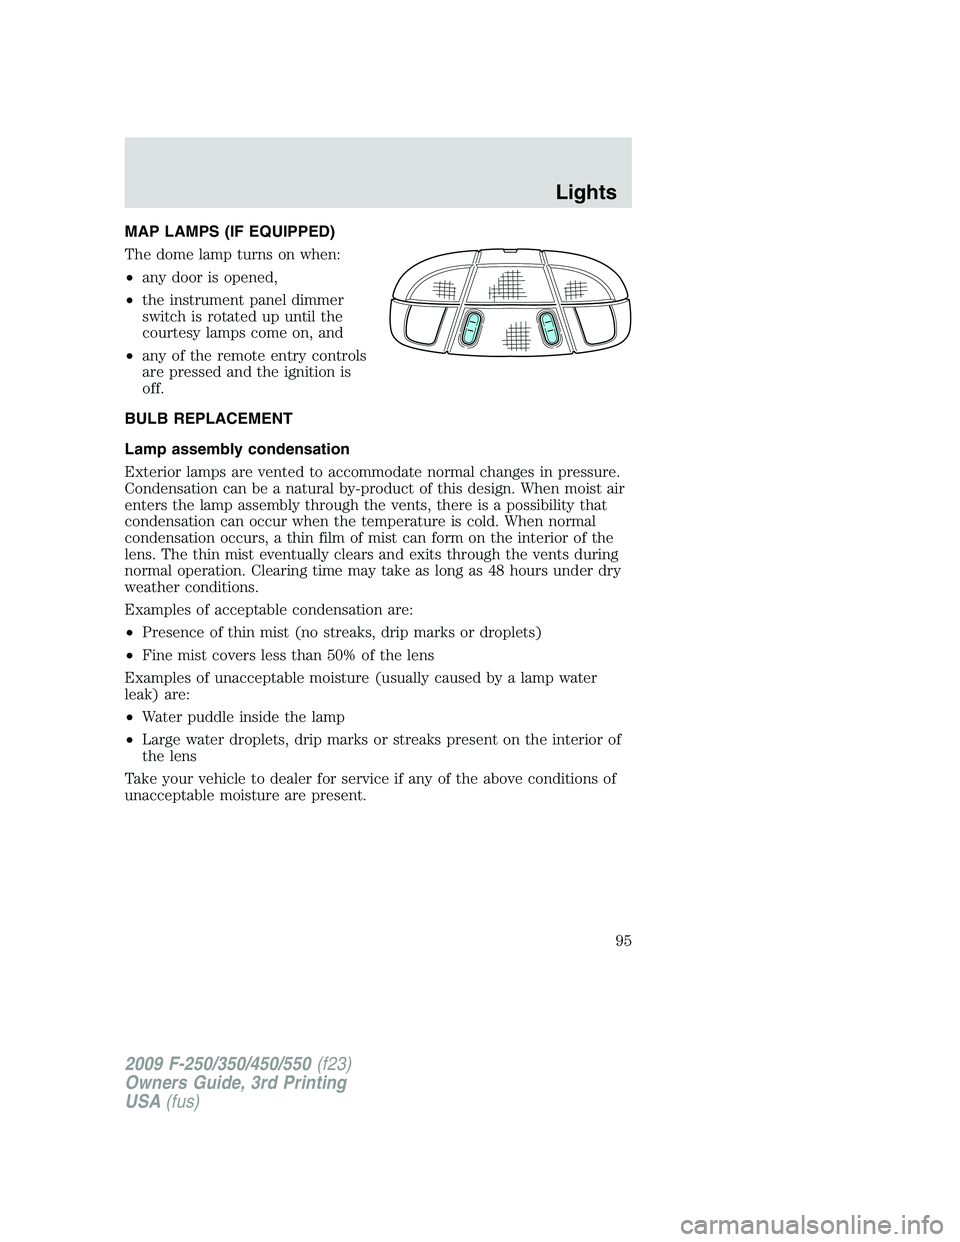 FORD F250 2009  Owners Manual MAP LAMPS (IF EQUIPPED)
The dome lamp turns on when:
•any door is opened,
•the instrument panel dimmer
switch is rotated up until the
courtesy lamps come on, and
•any of the remote entry control